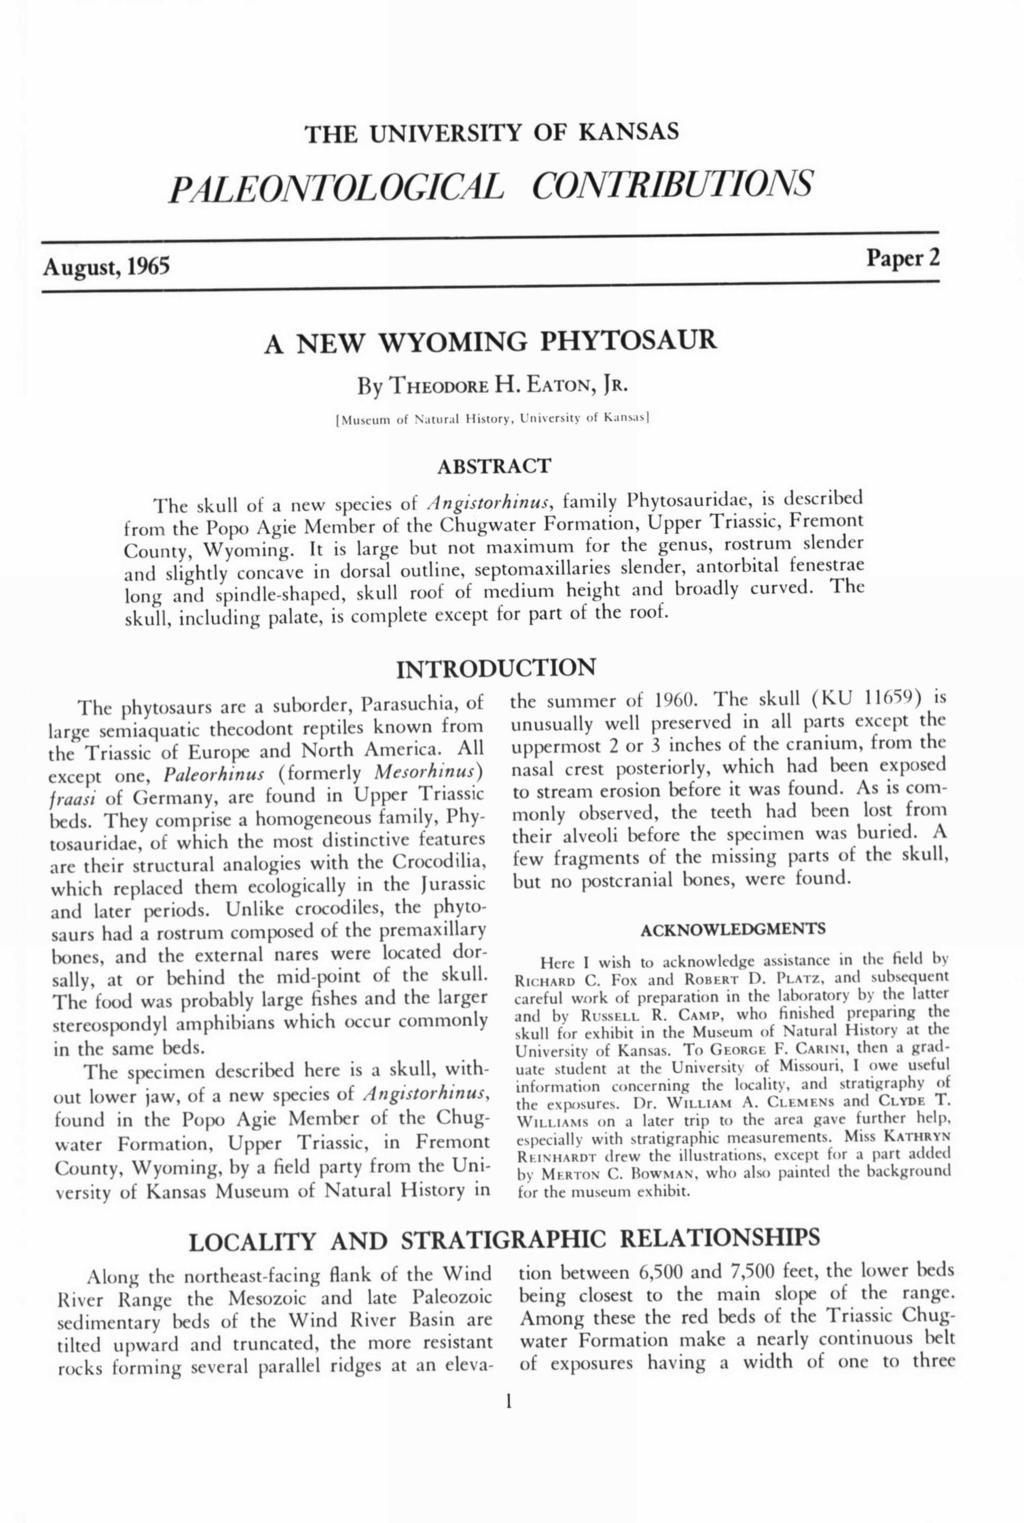 THE UNIVERSITY OF KANSAS PALEONTOLOGICAL CONTRIBUTIONS August, 1965 Paper 2 A NEW WYOMING PHYTOSAUR By THEODORE H. EATON, JR.